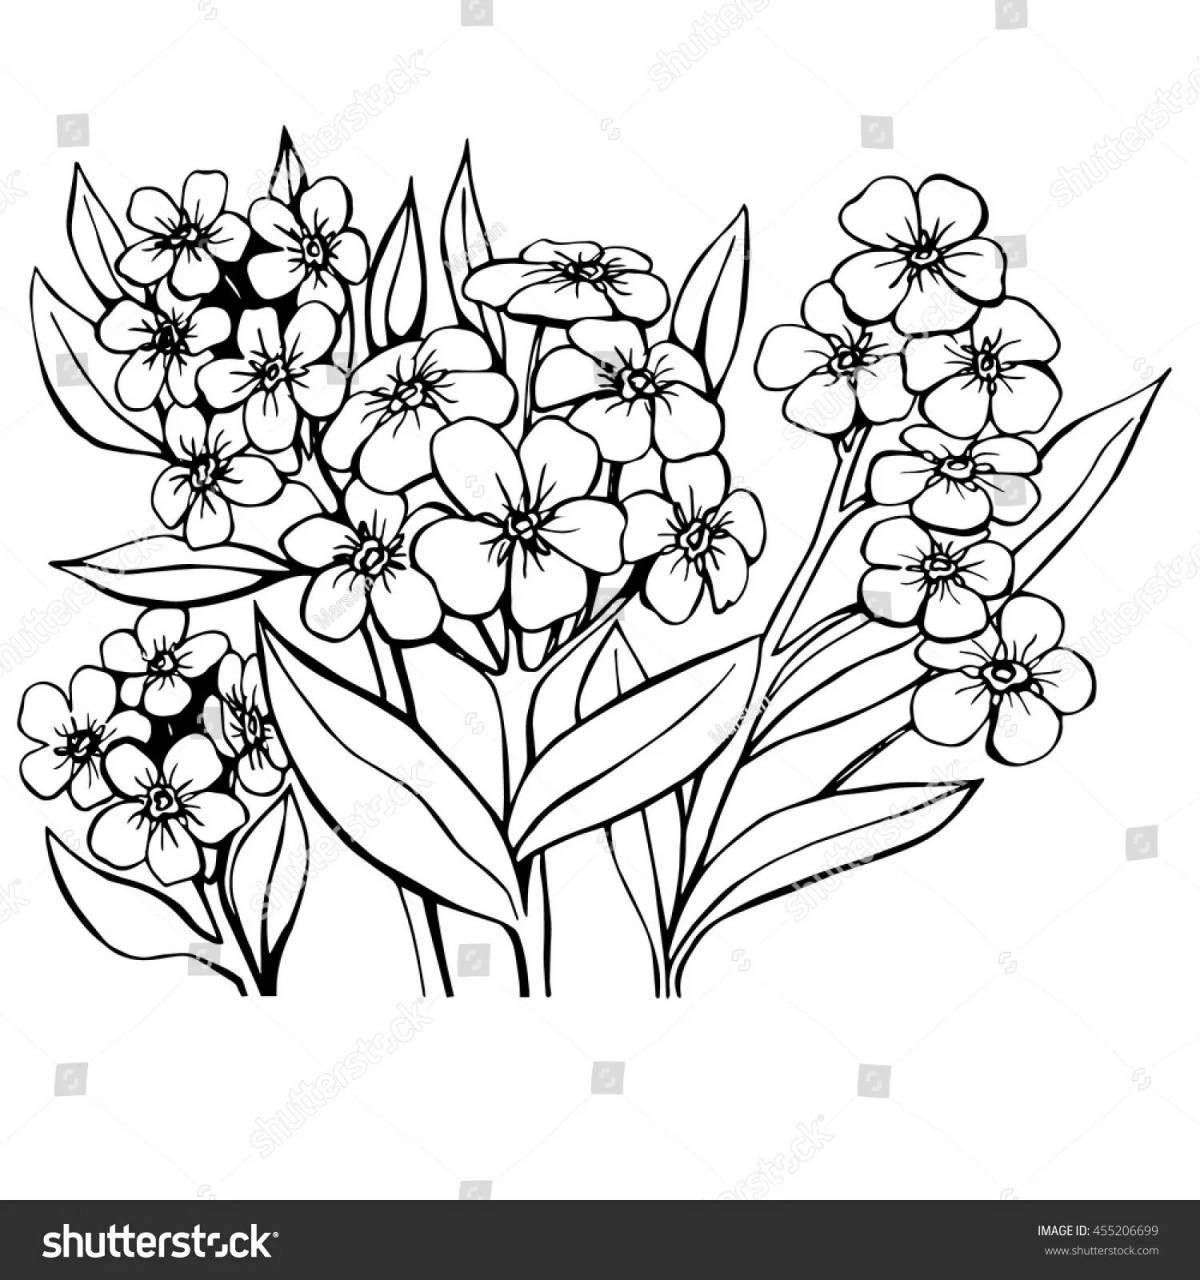 Gorgeous forget-me-not coloring page